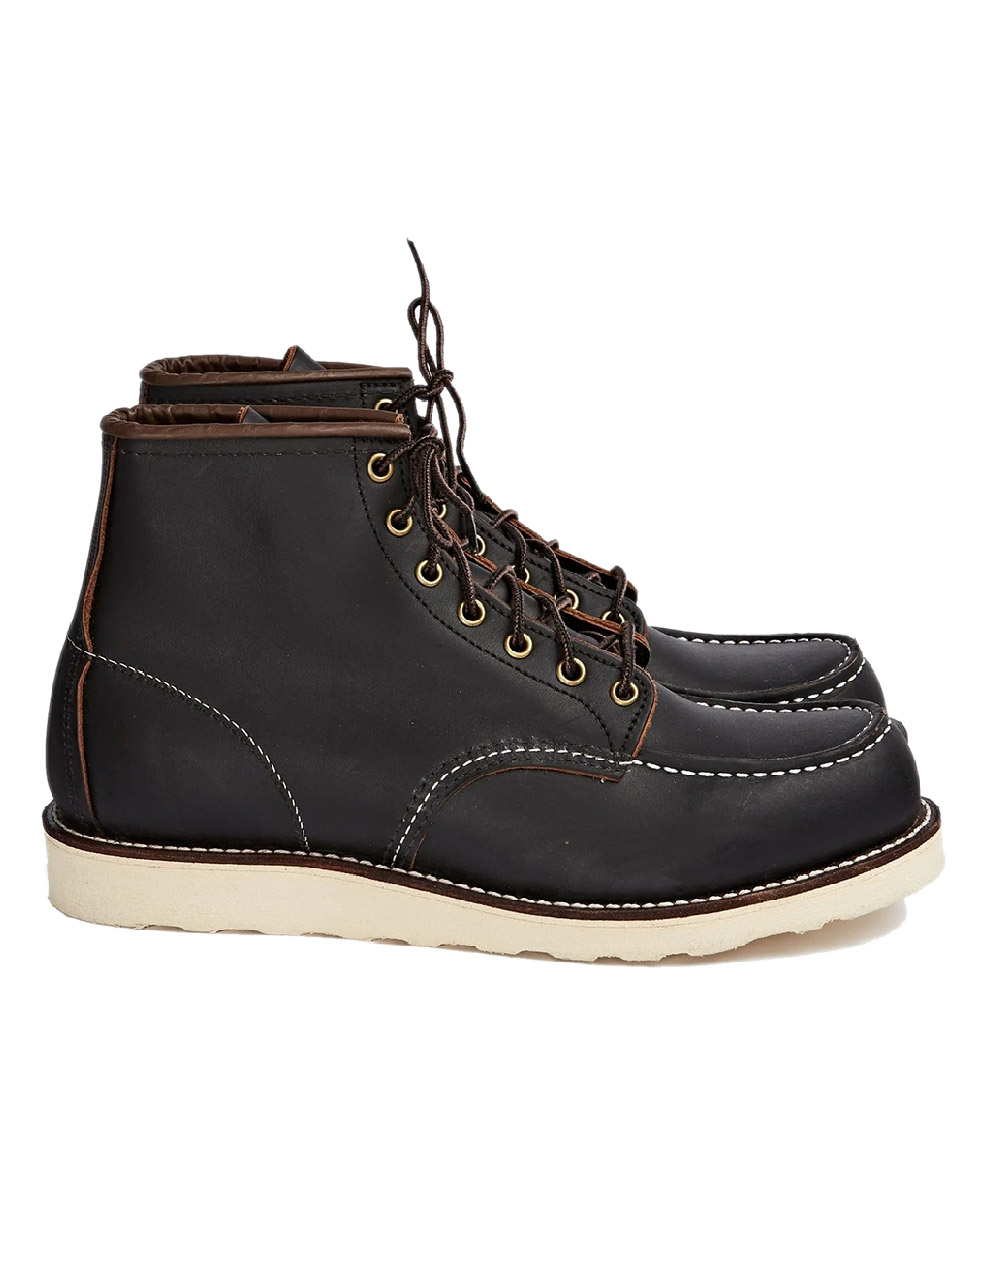 Red Wing Shoes – Classic Moc Toe